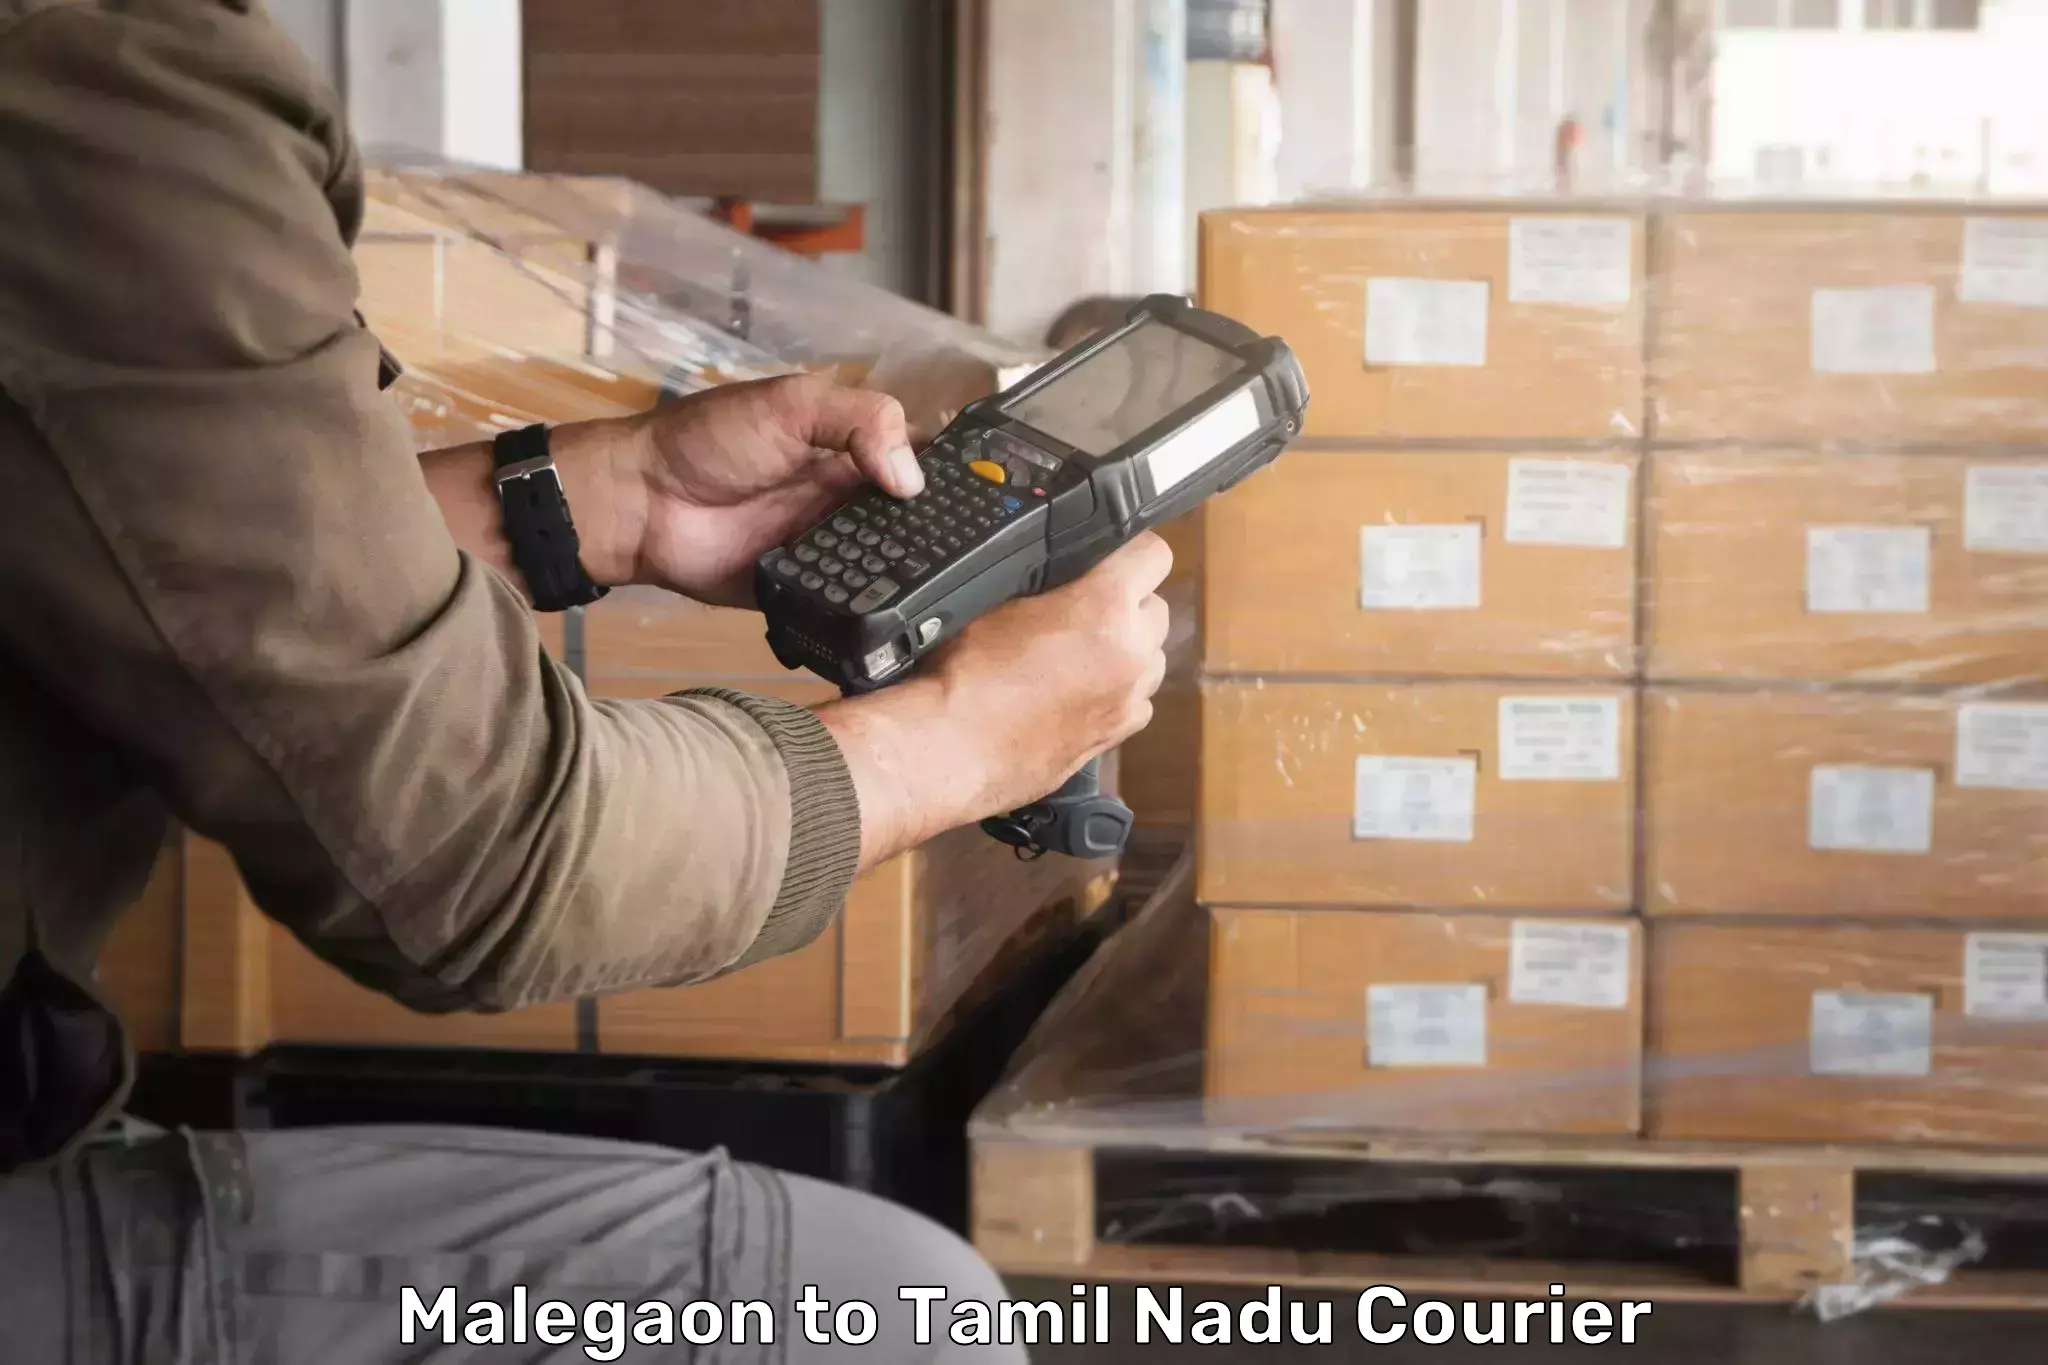 Tech-enabled shipping Malegaon to Tamil Nadu